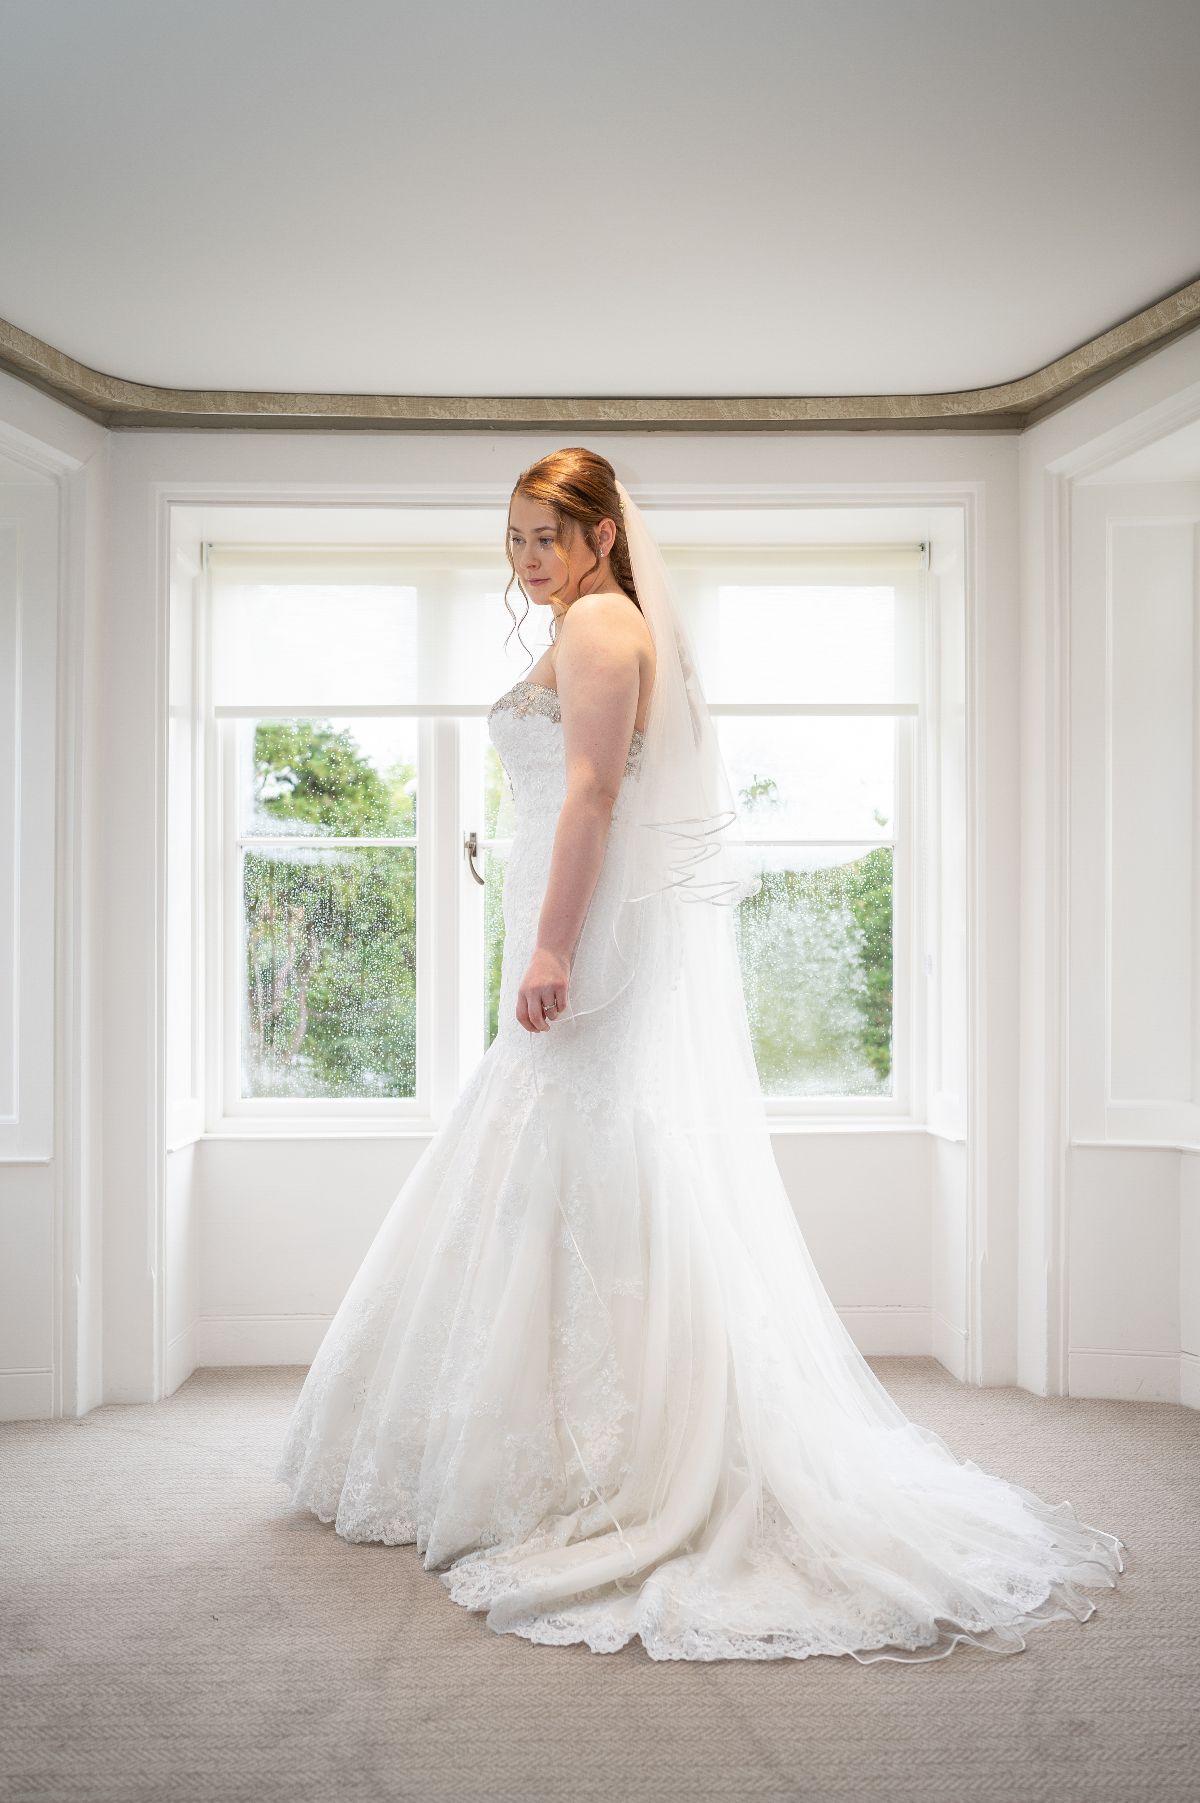 the all so important wedding dress shot, taking in the Manor suite Bay window